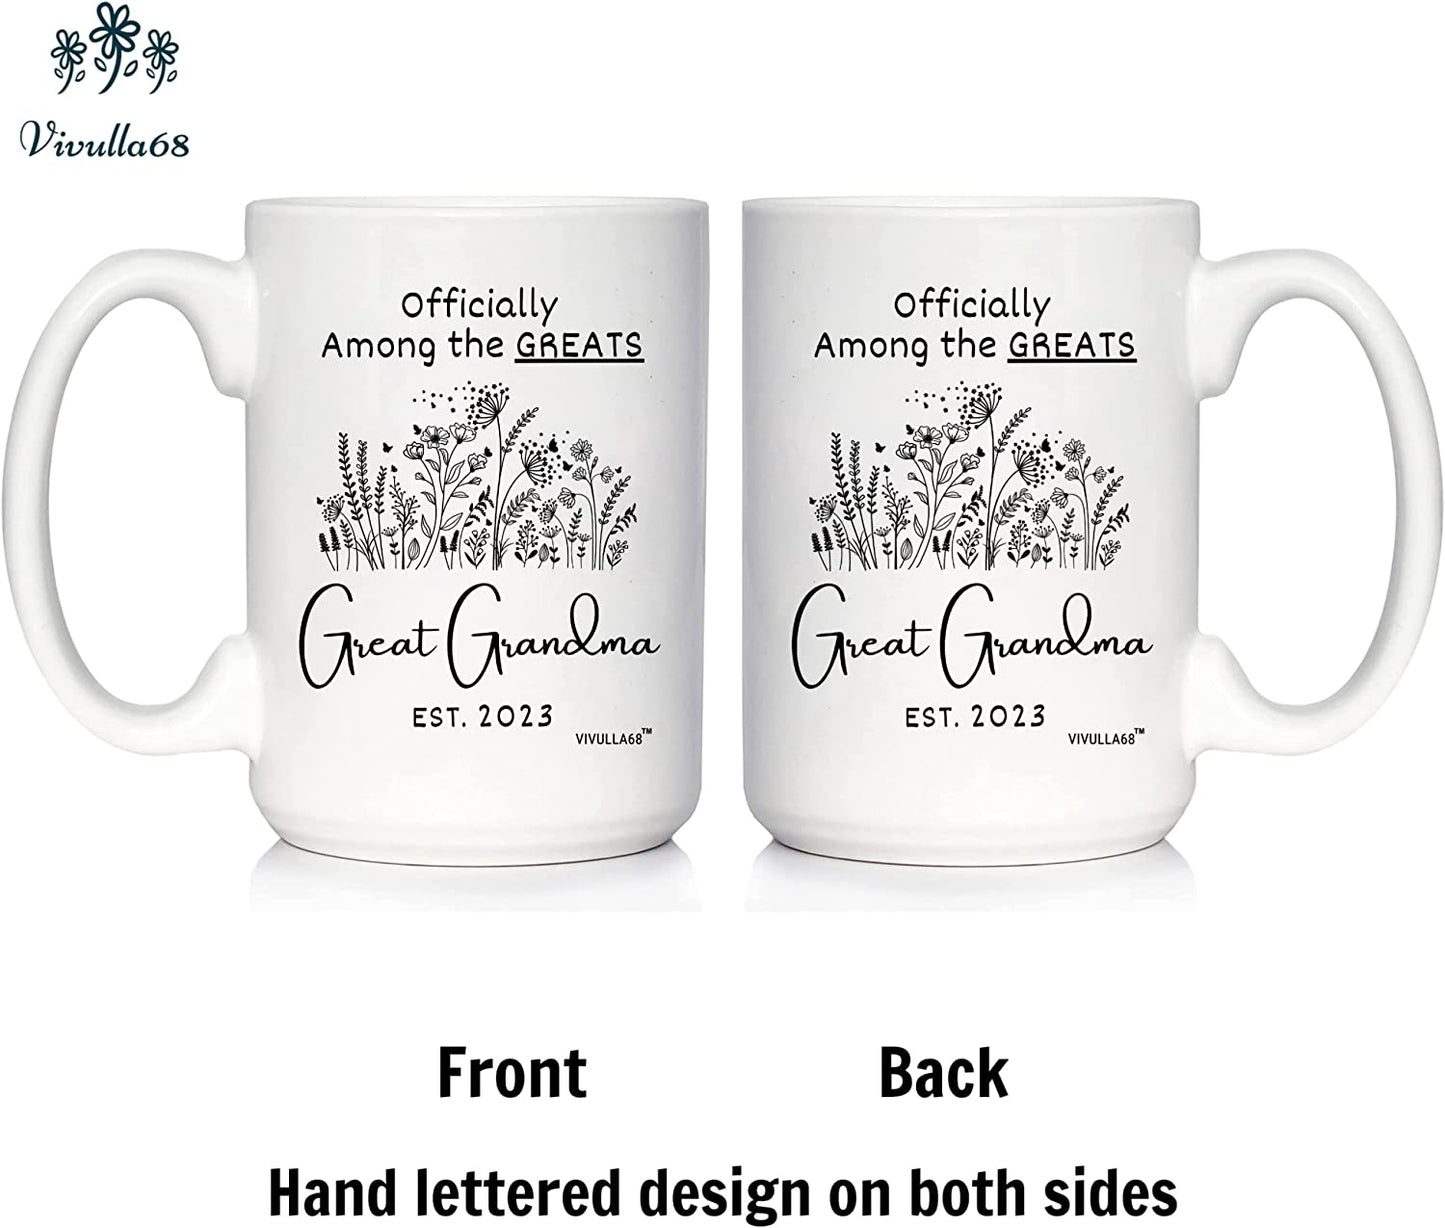 Great Grandma Mug 2023, New Great Grandma Gifts, Youre Going To Be Great Grandparents, Great Grandma Christmas Gifts, Presents For Great Grandma Pregnancy Announcement, Great Grandmother Gifts